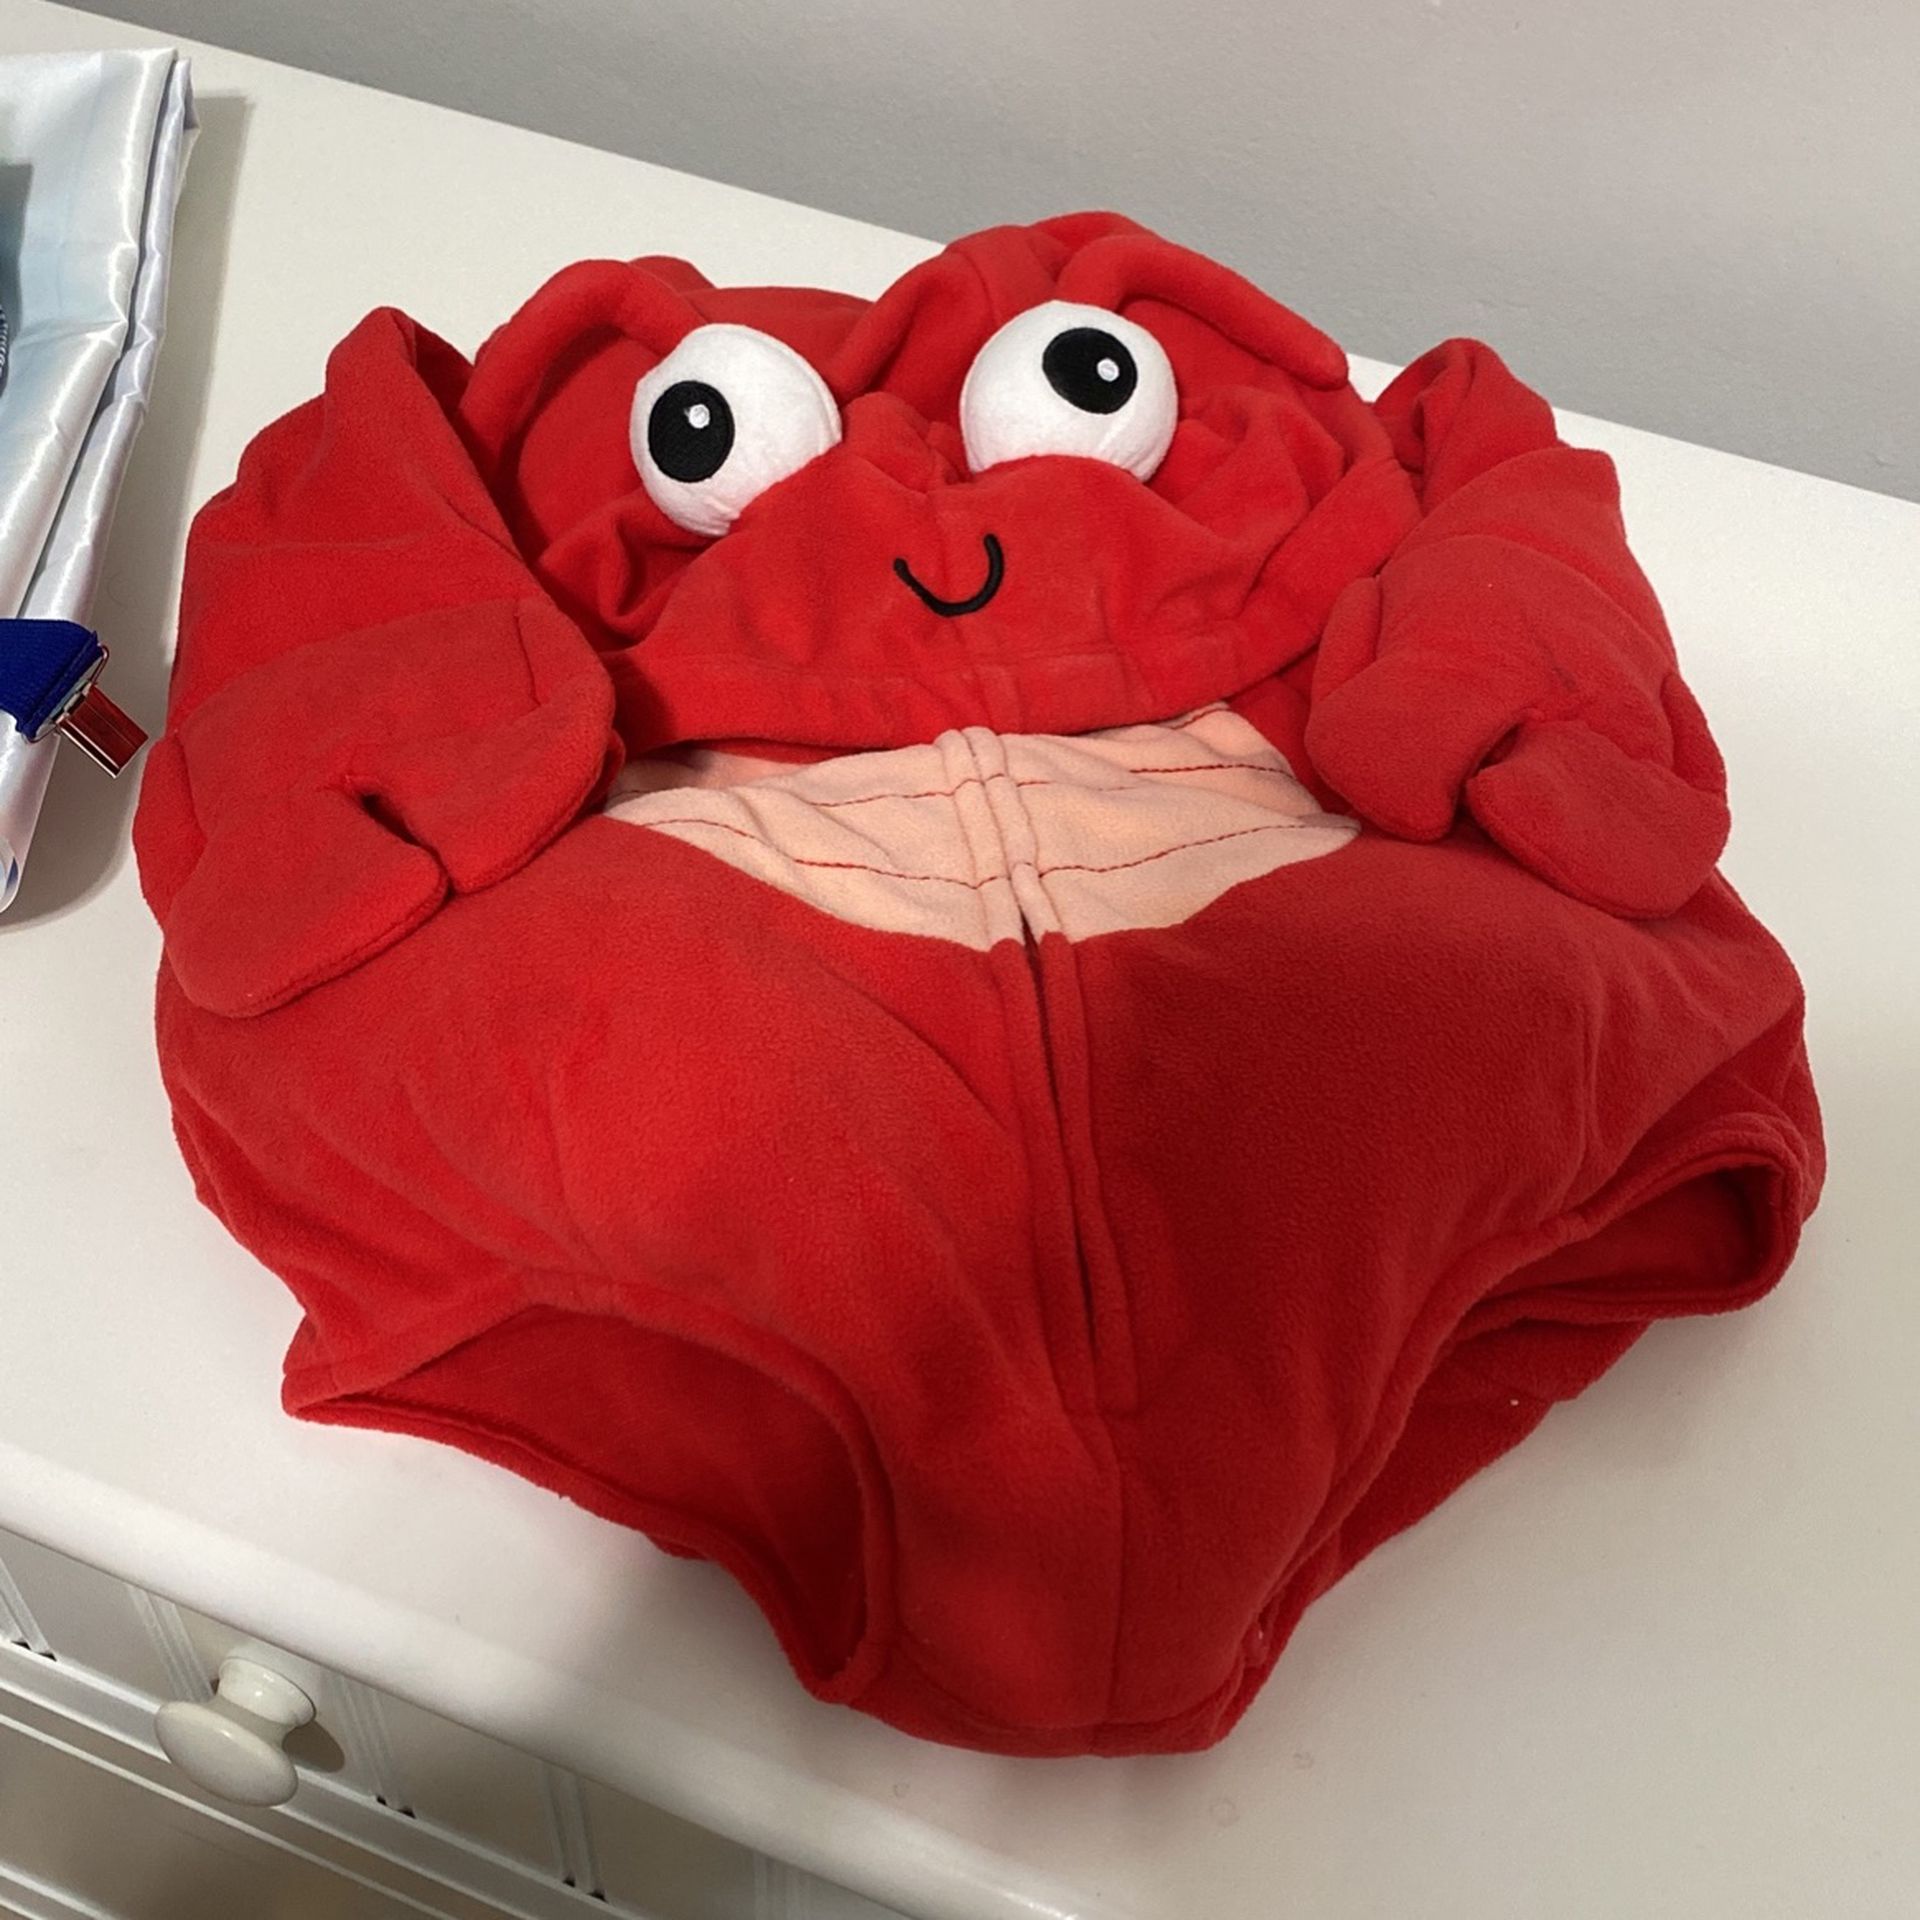 Carter's Baby Lobster Costume 18 mos